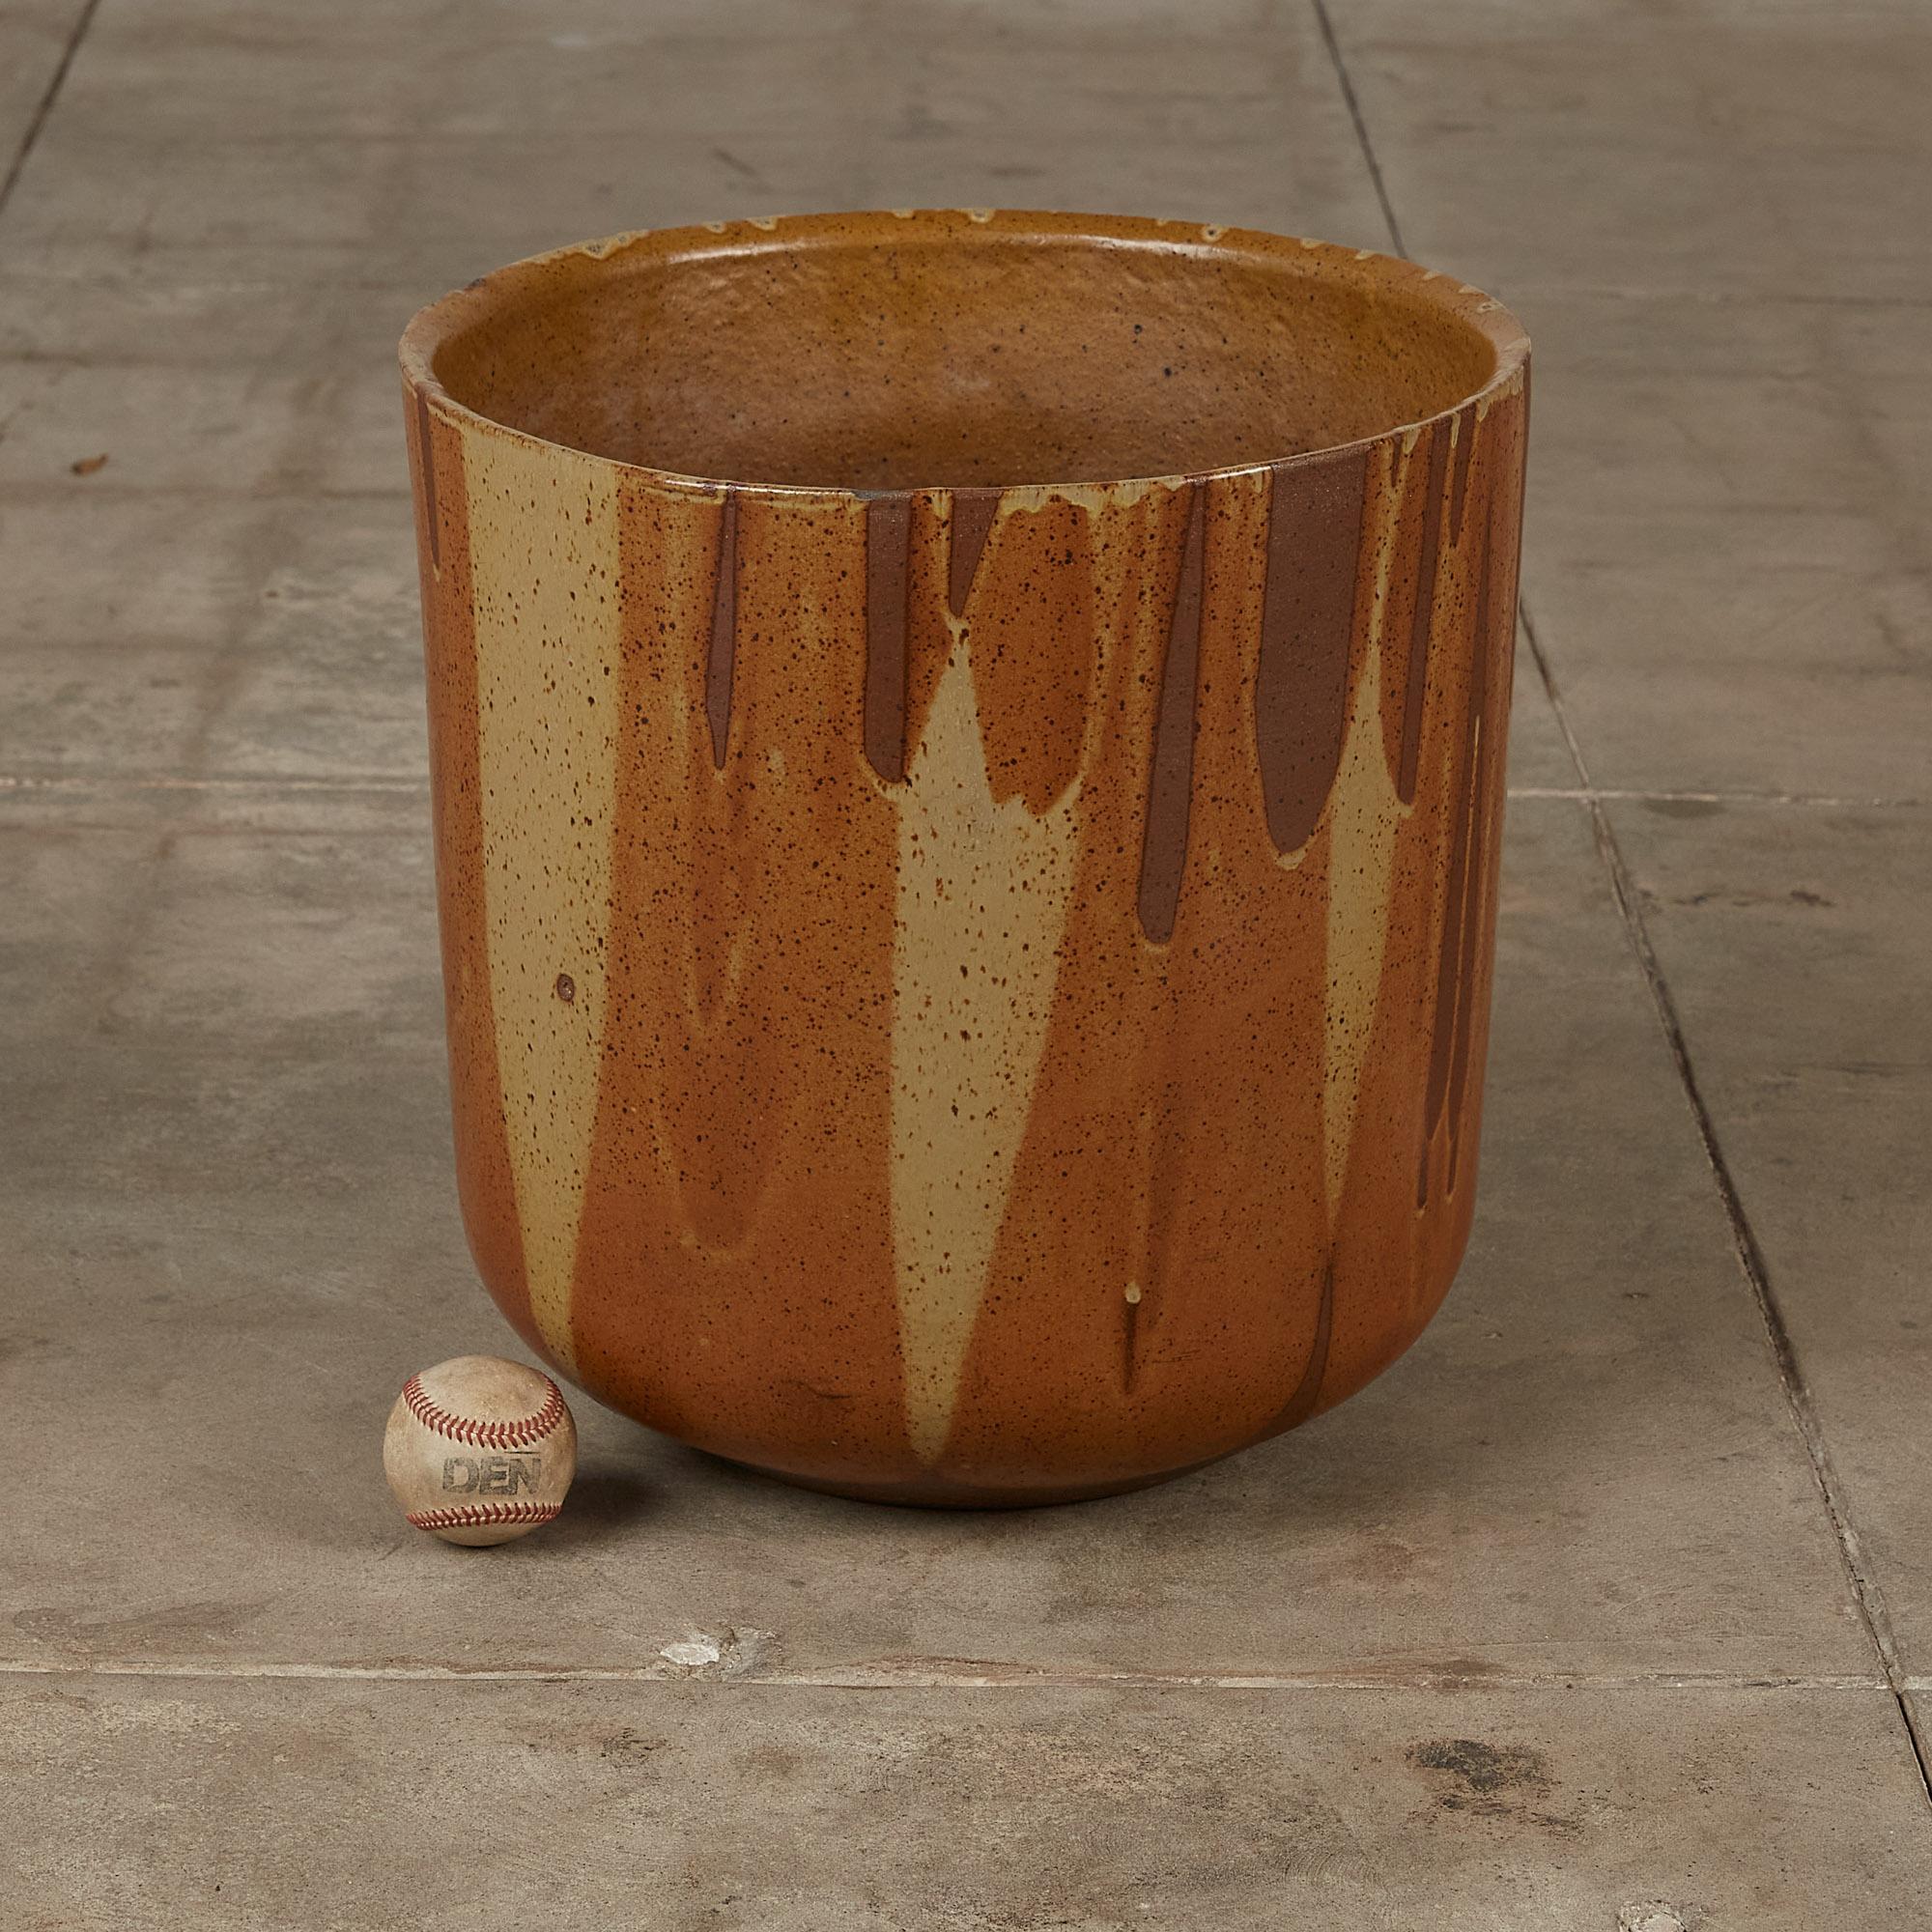 A tulip-shaped planter by David Cressey for the Pro/Artisan collection by Architectural Pottery with Cressey’s signature “Flame Glaze.” This planter has a rounded bottom that widens towards the opening, a simple shape rendered dramatic by the